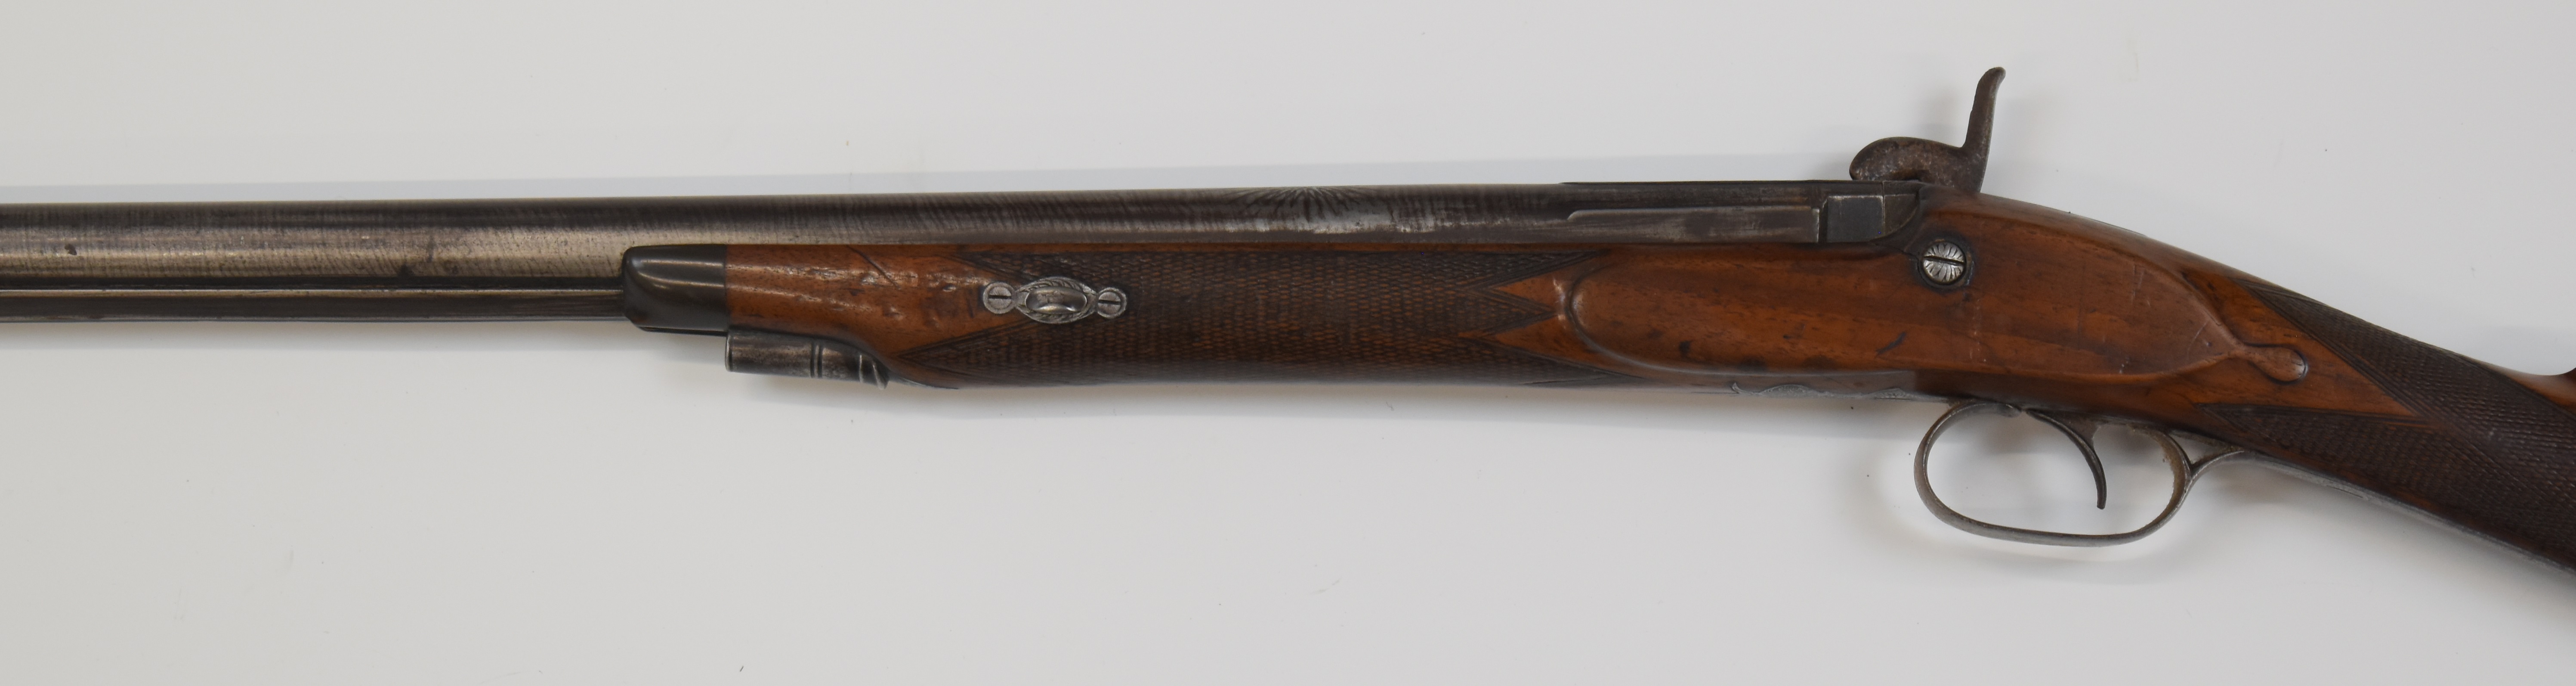 Indistinctly named 12 bore percussion hammer action muzzle loading sporting gun with engraved scenes - Image 9 of 10